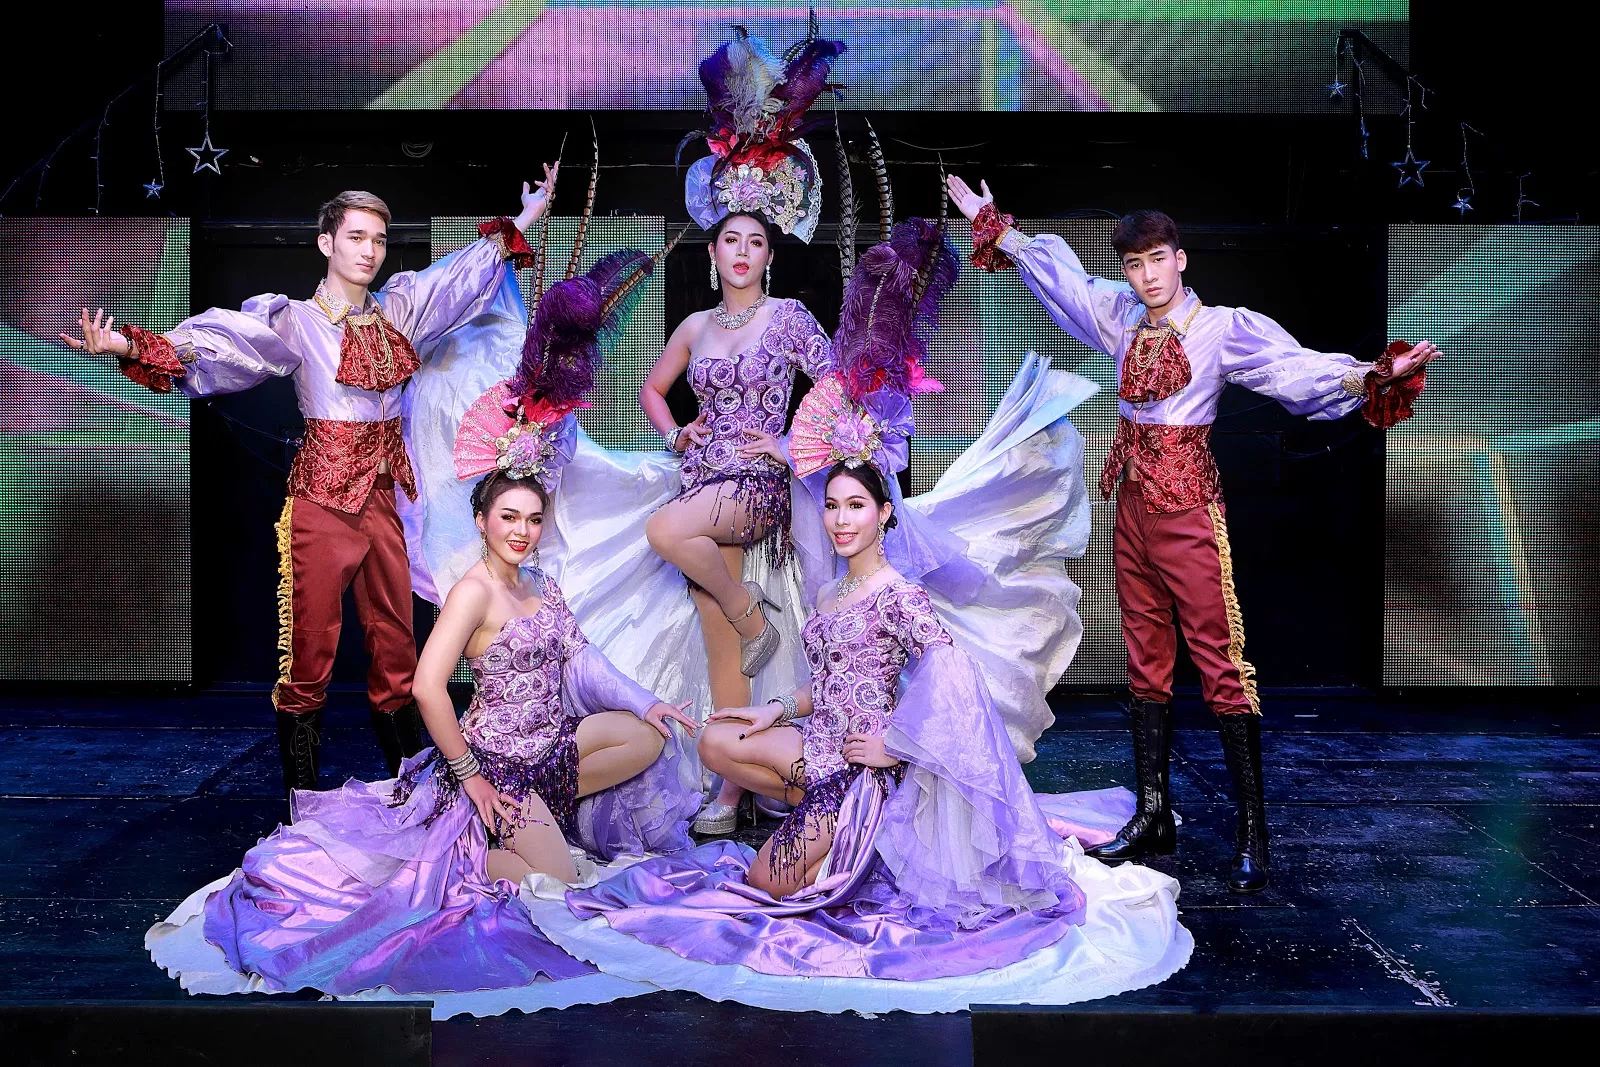 Siam Dragon Show in Thailand, Central Asia | LGBT-Friendly Places - Rated 0.9